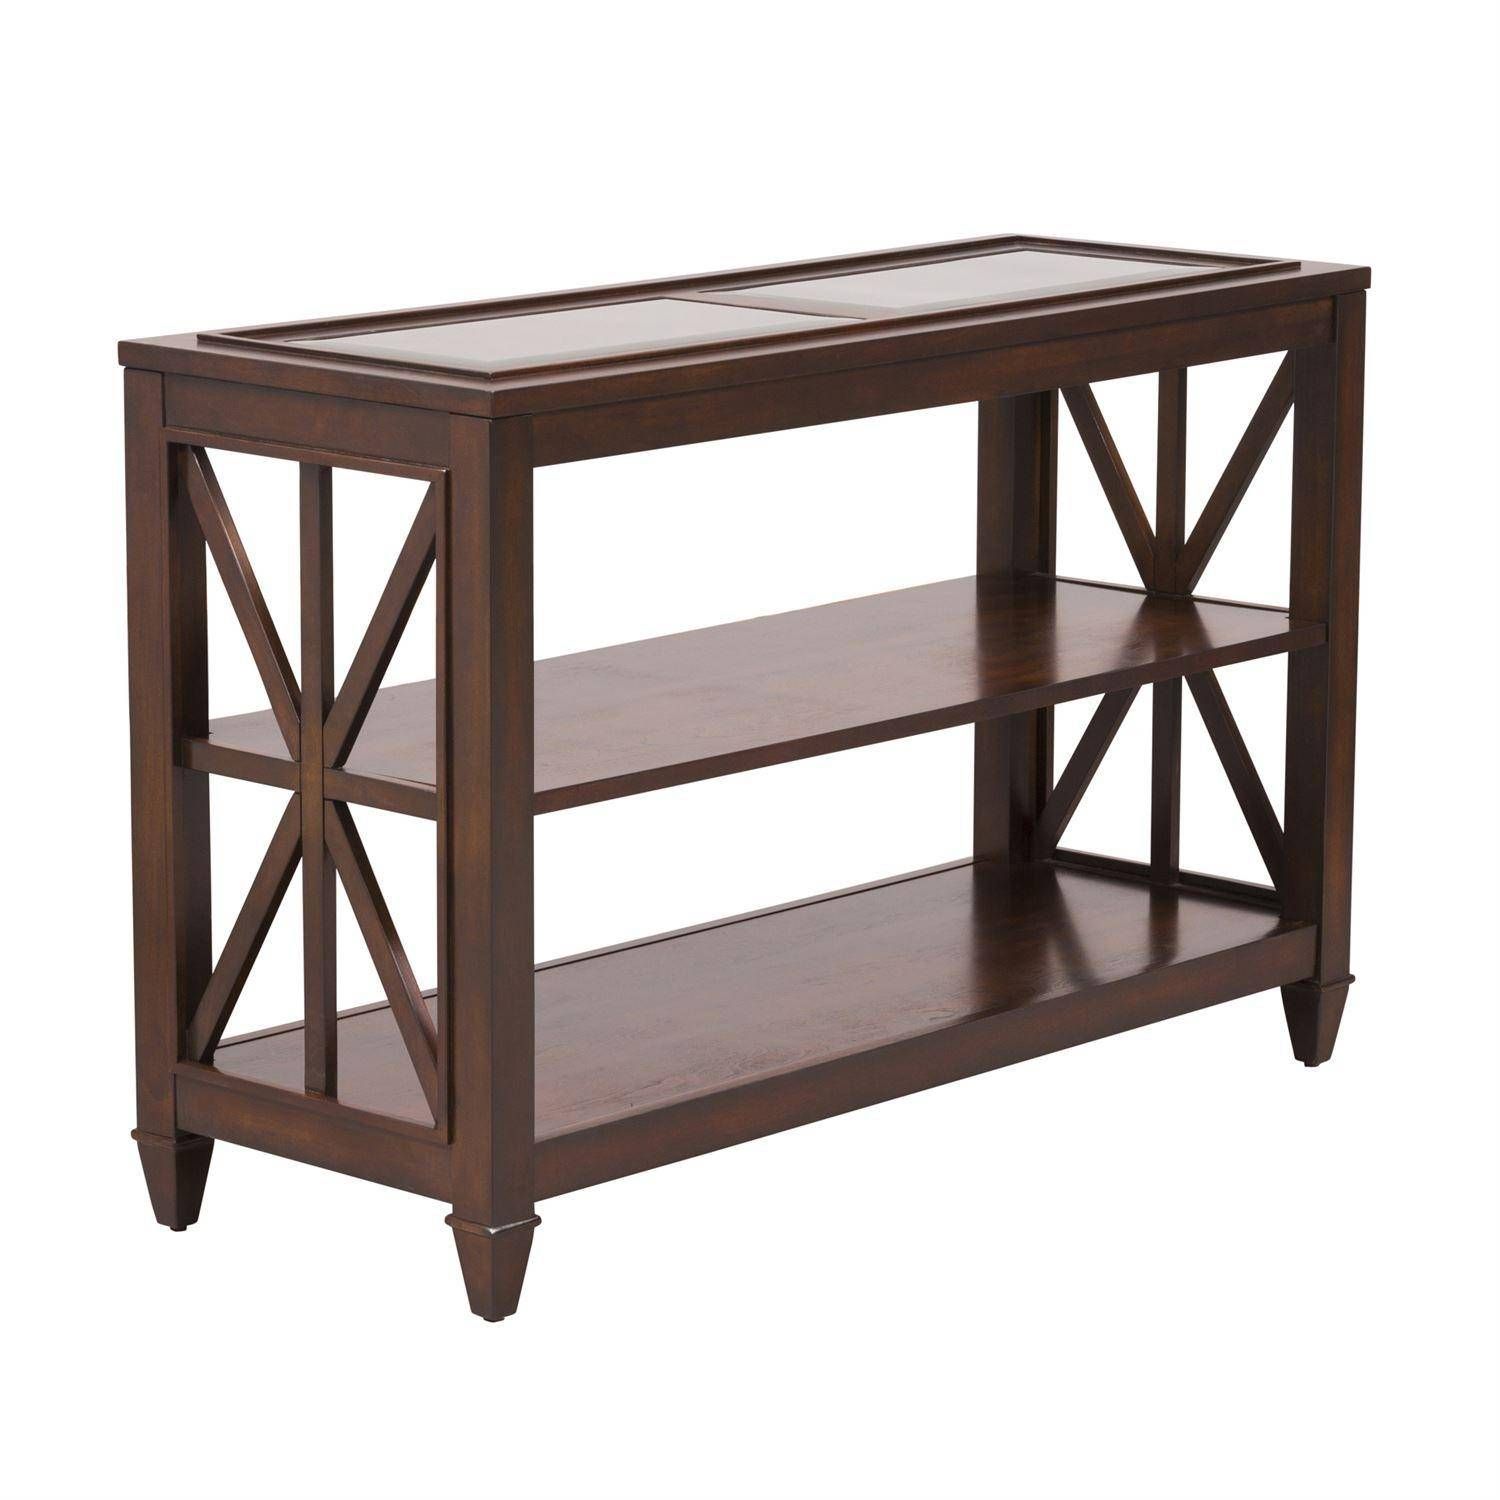 Transitional Brown Wood Console Table Caroline (318 Ot Regarding Brown Wood And Steel Plate Console Tables (View 8 of 20)